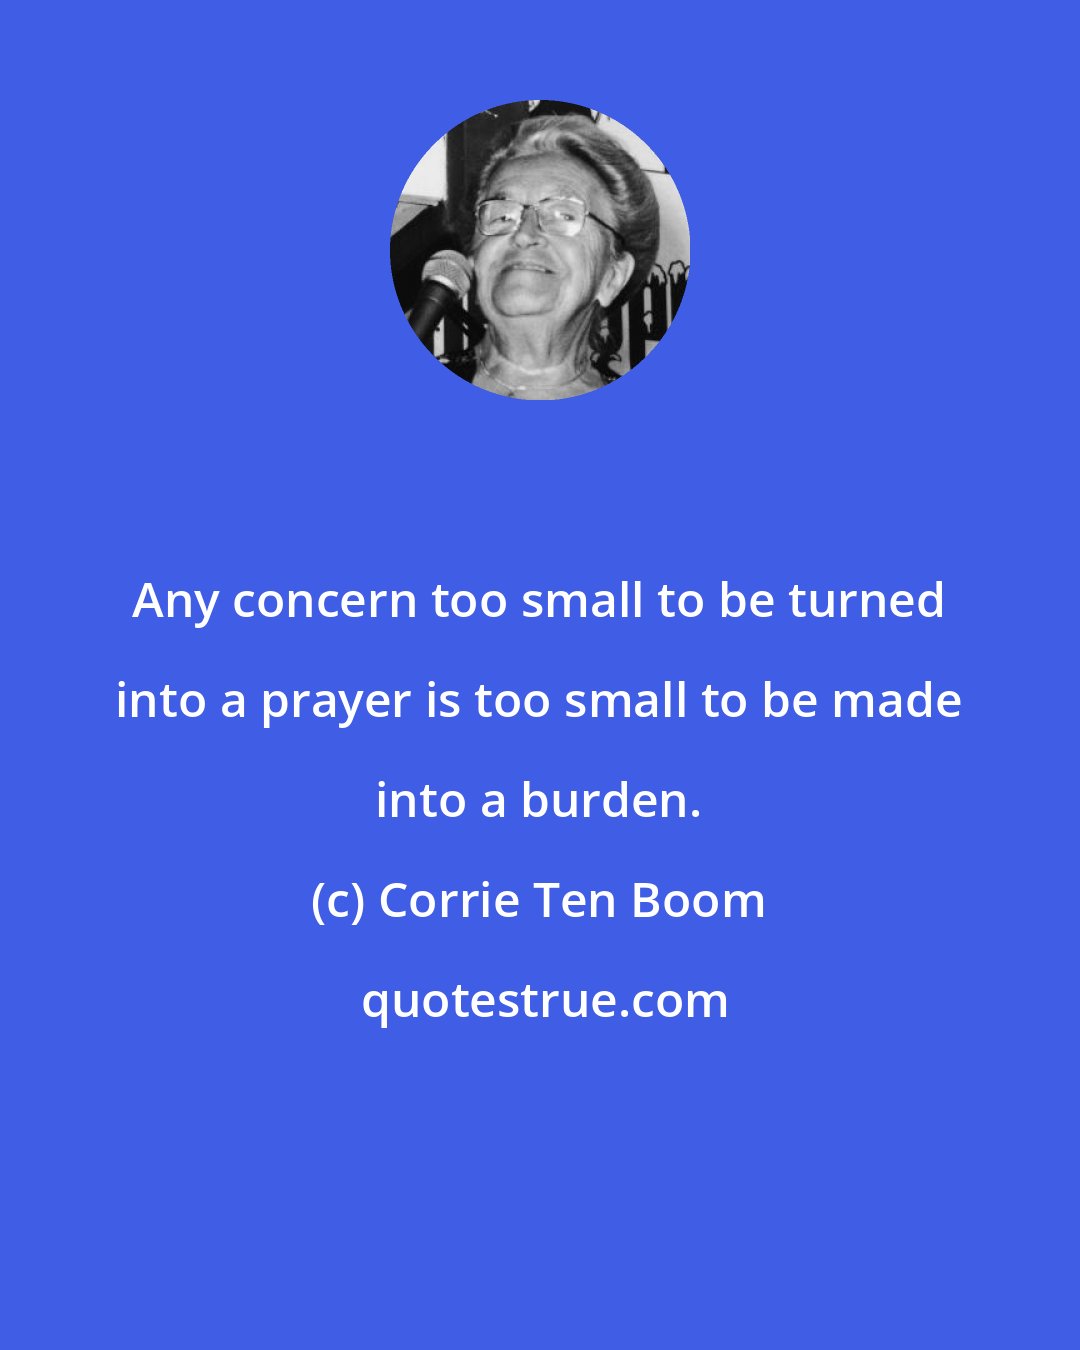 Corrie Ten Boom: Any concern too small to be turned into a prayer is too small to be made into a burden.